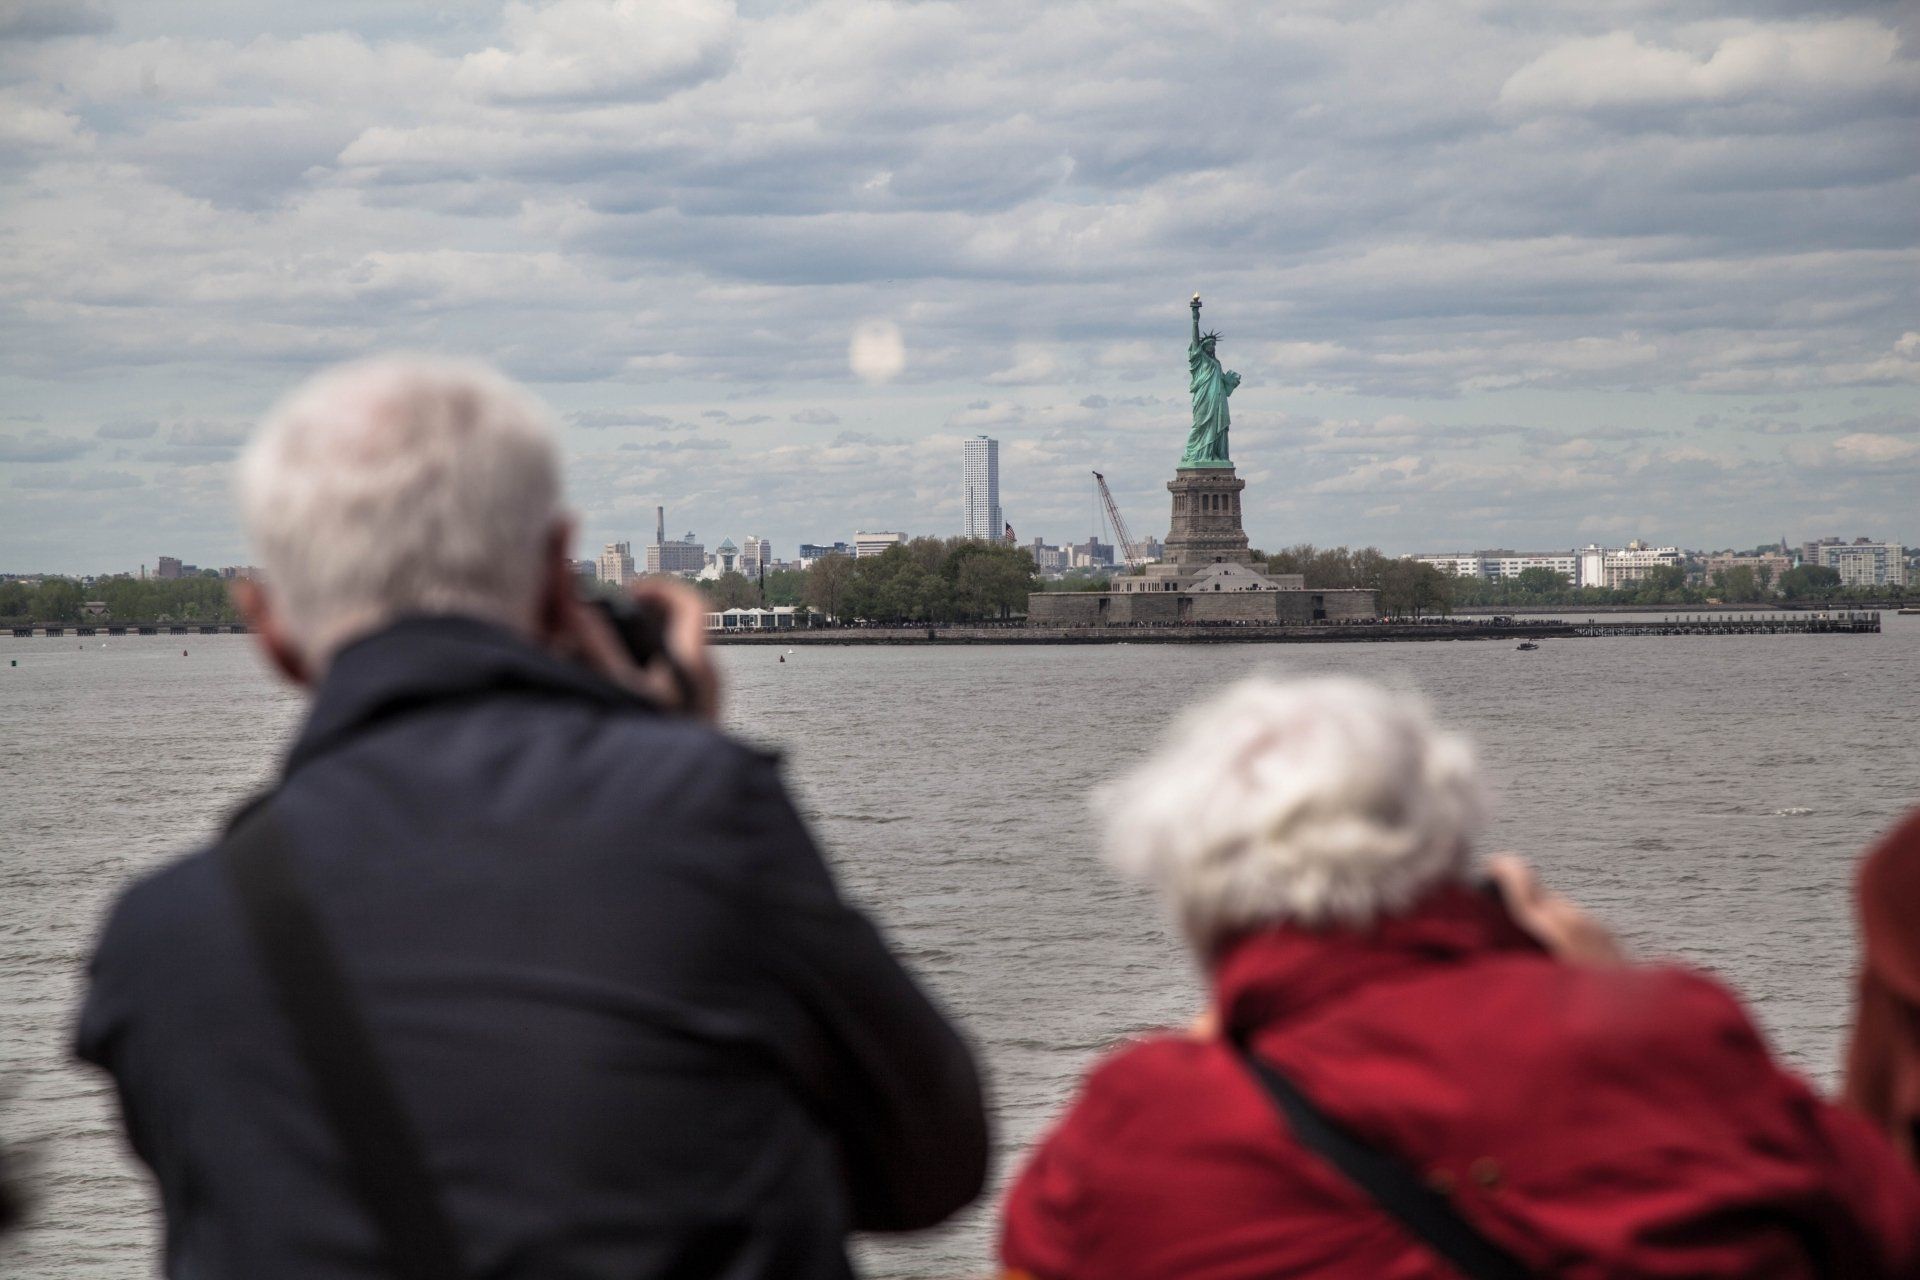 Elderly couple with gray hair, back-facing, wearing coats, on a ferry, taking photos of the Statue of Liberty.